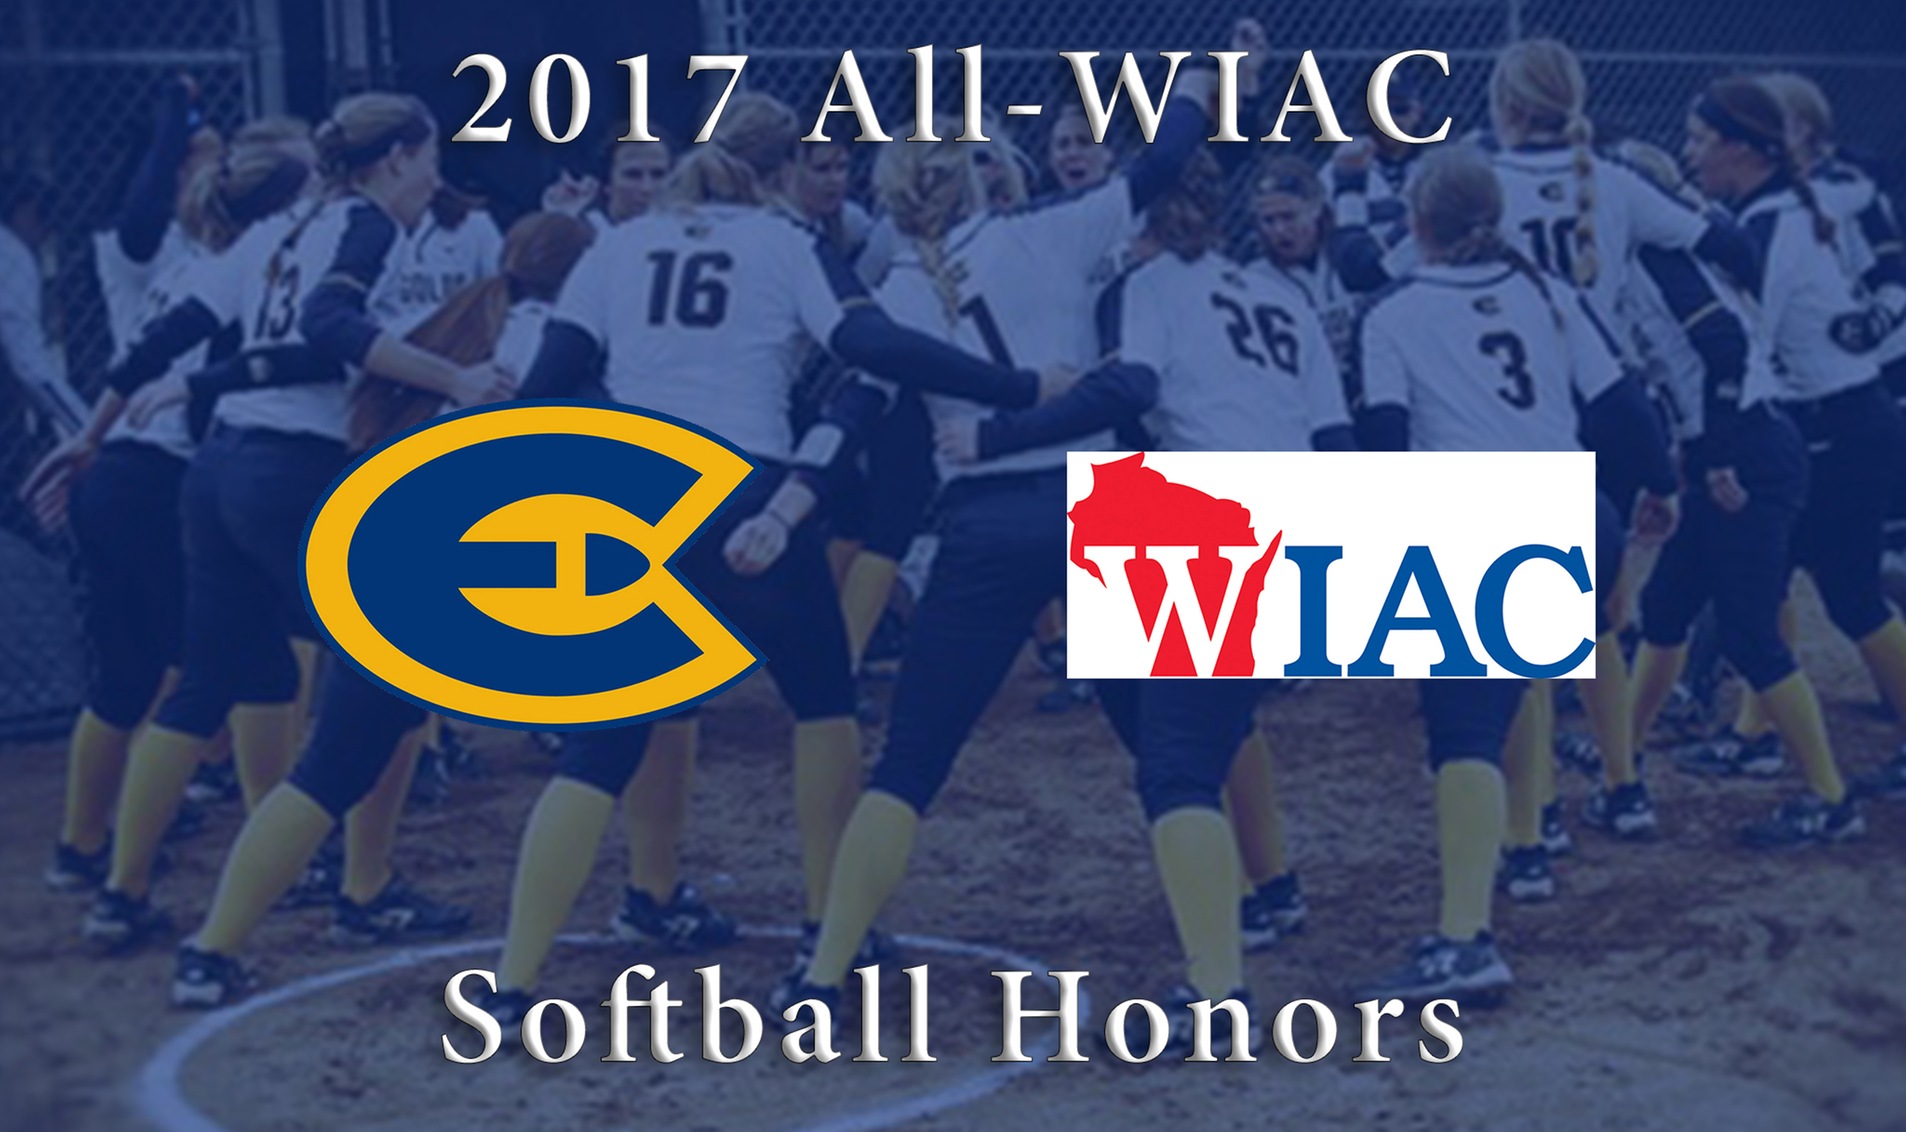 Six Blugolds receive All-WIAC softball recognition